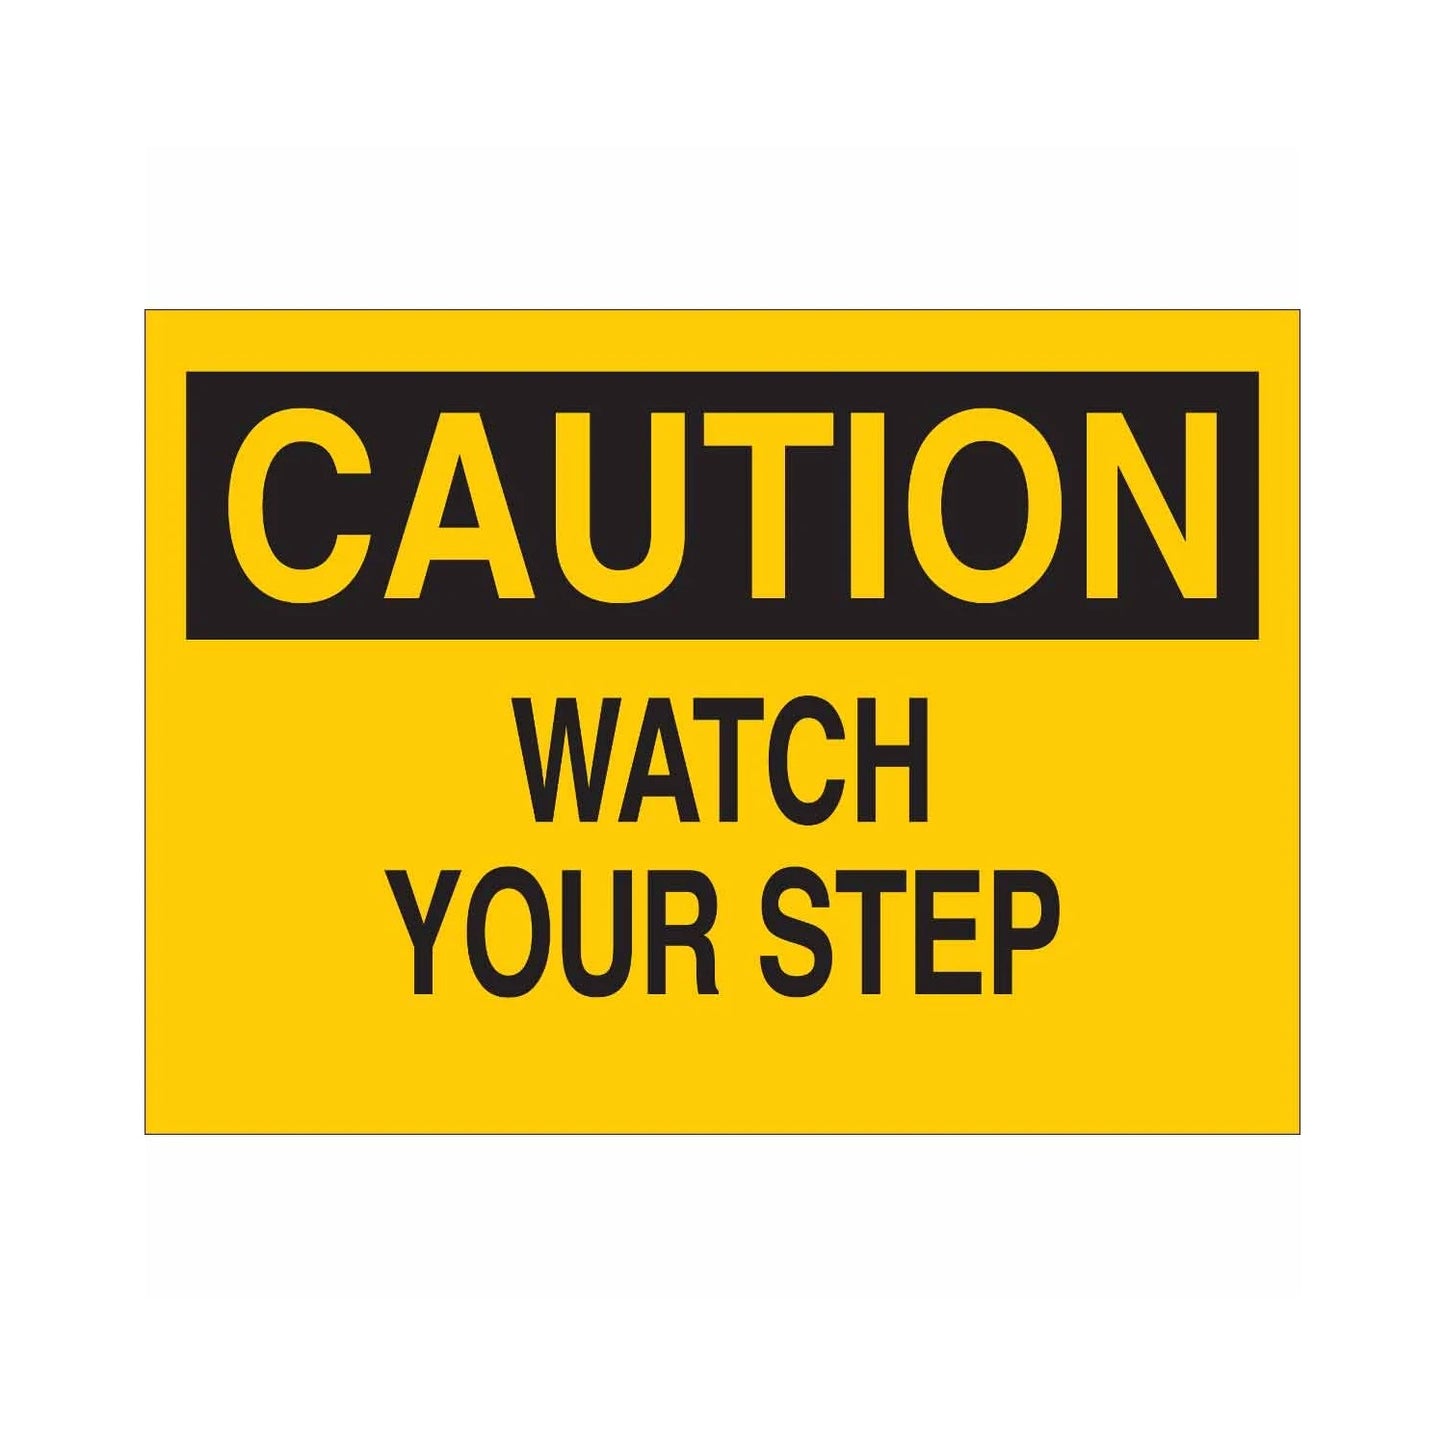 CAUTION Watch Your Step